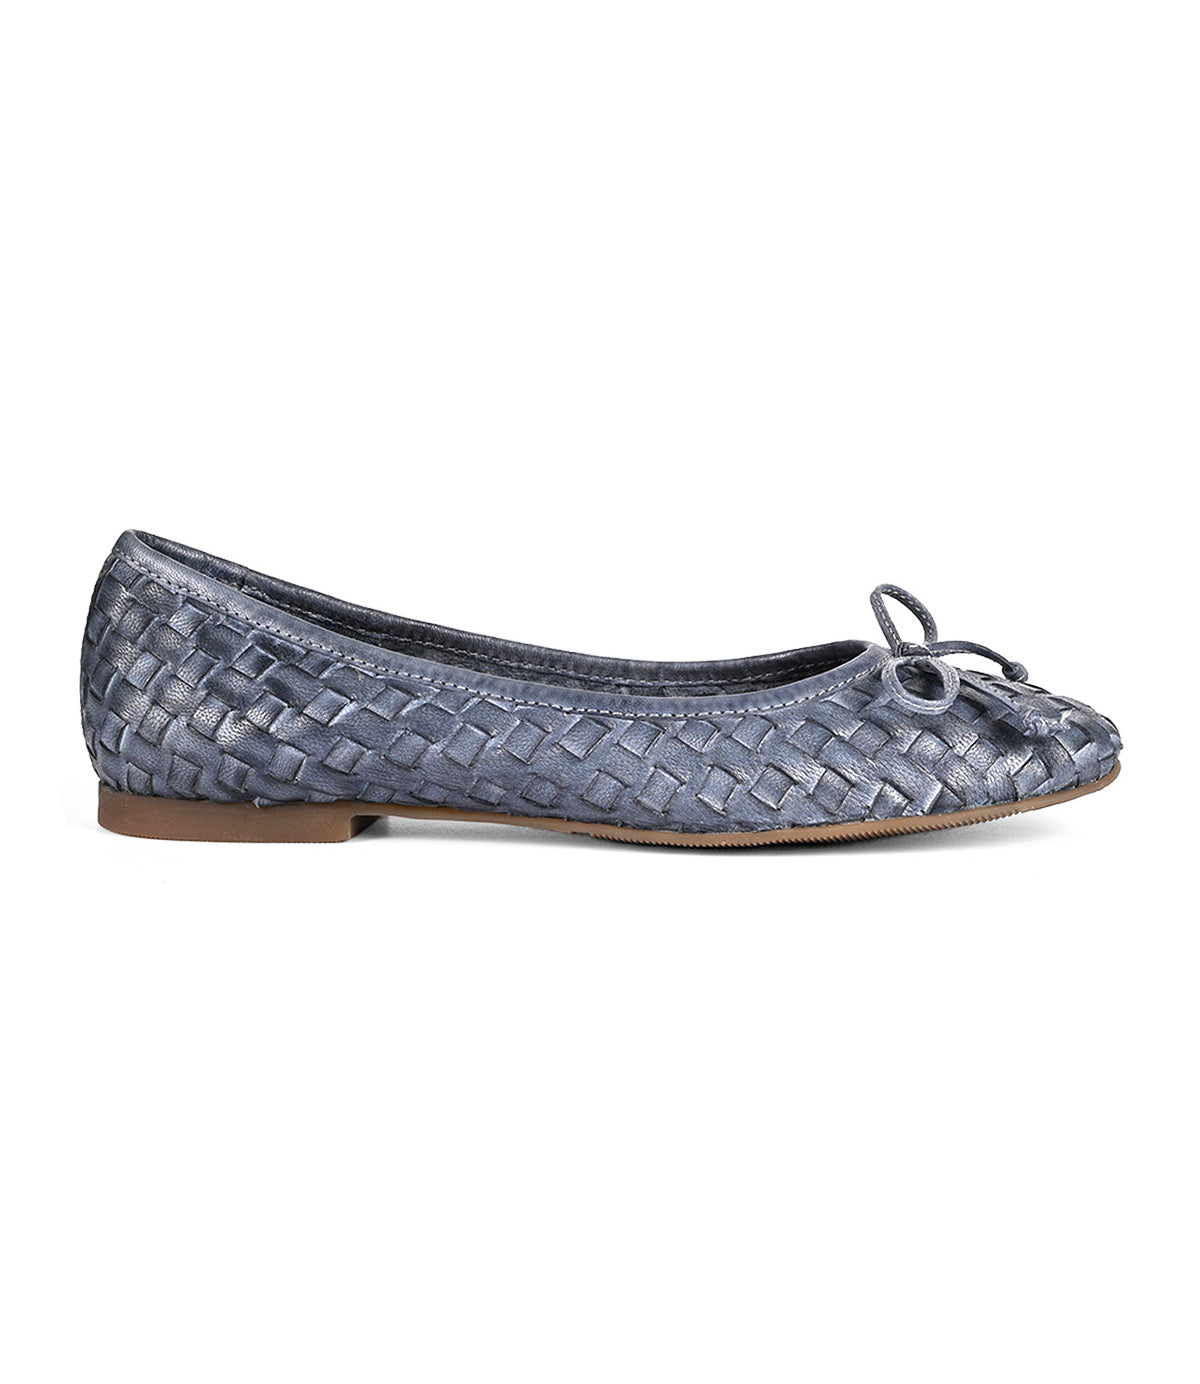 A single dark grey, hand-woven leather ballet flat called "Business" by Roan with a small bow on the front and a beige sole, viewed from the side.